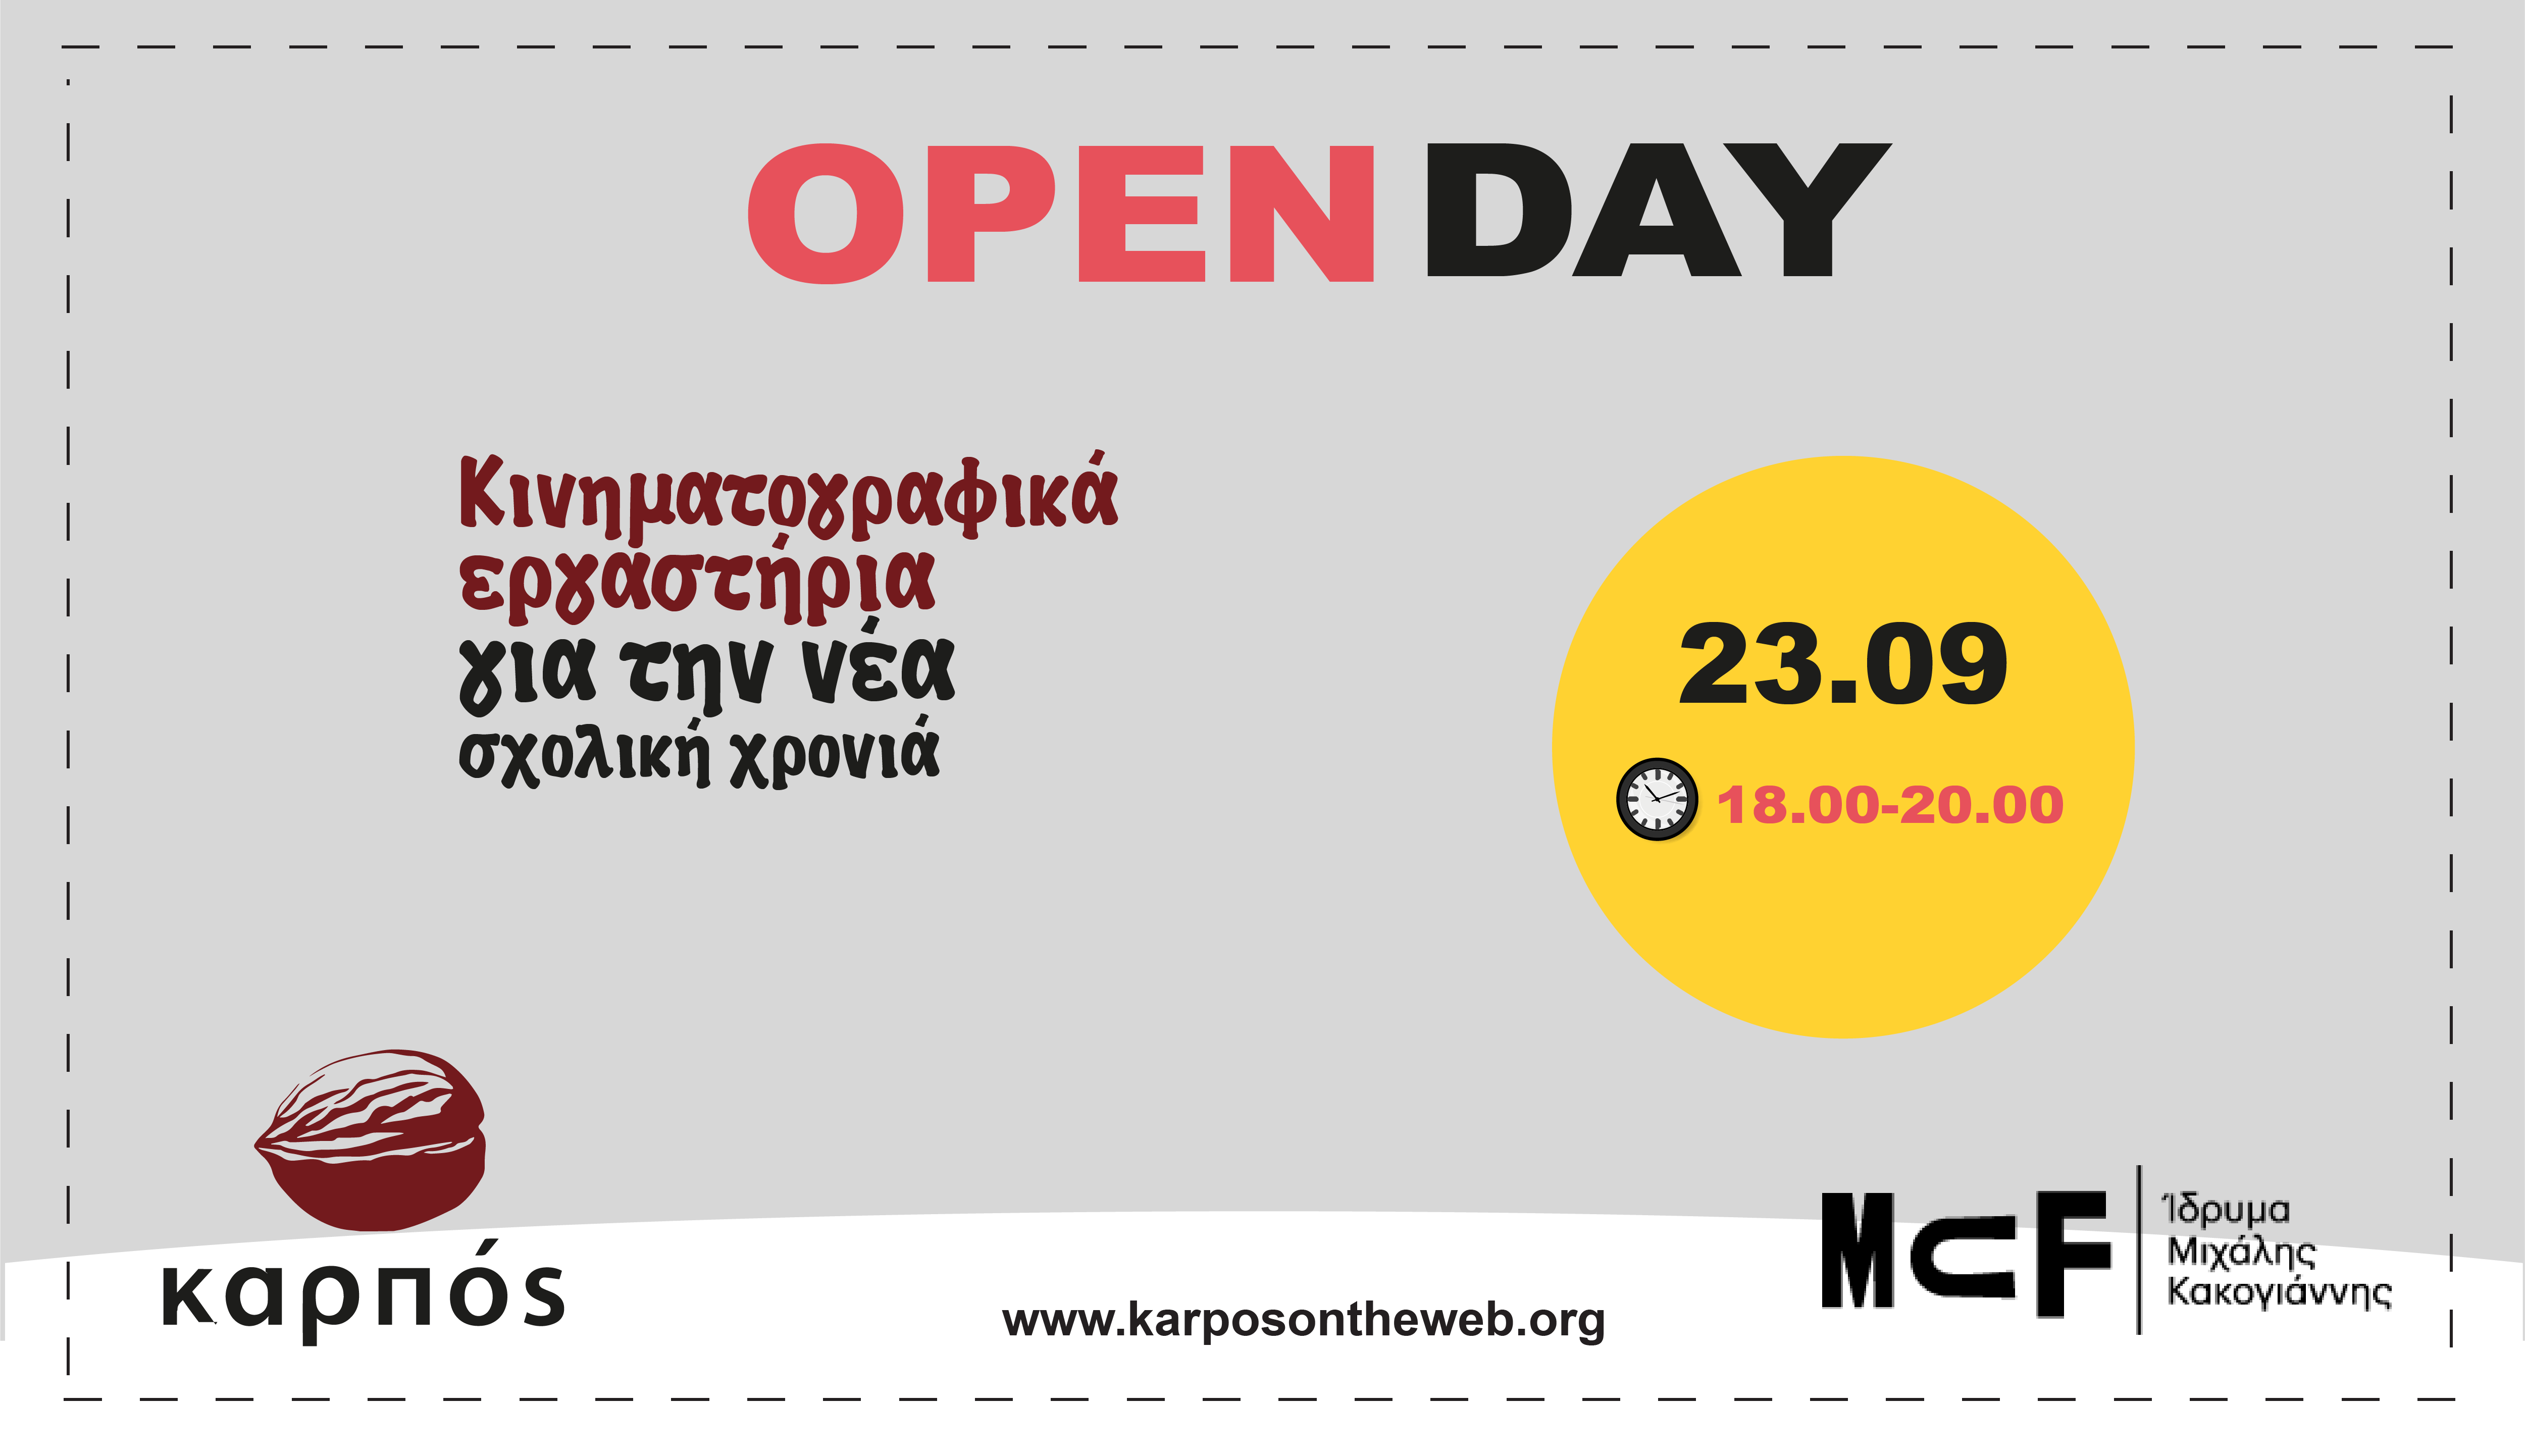 open day poster for word press23